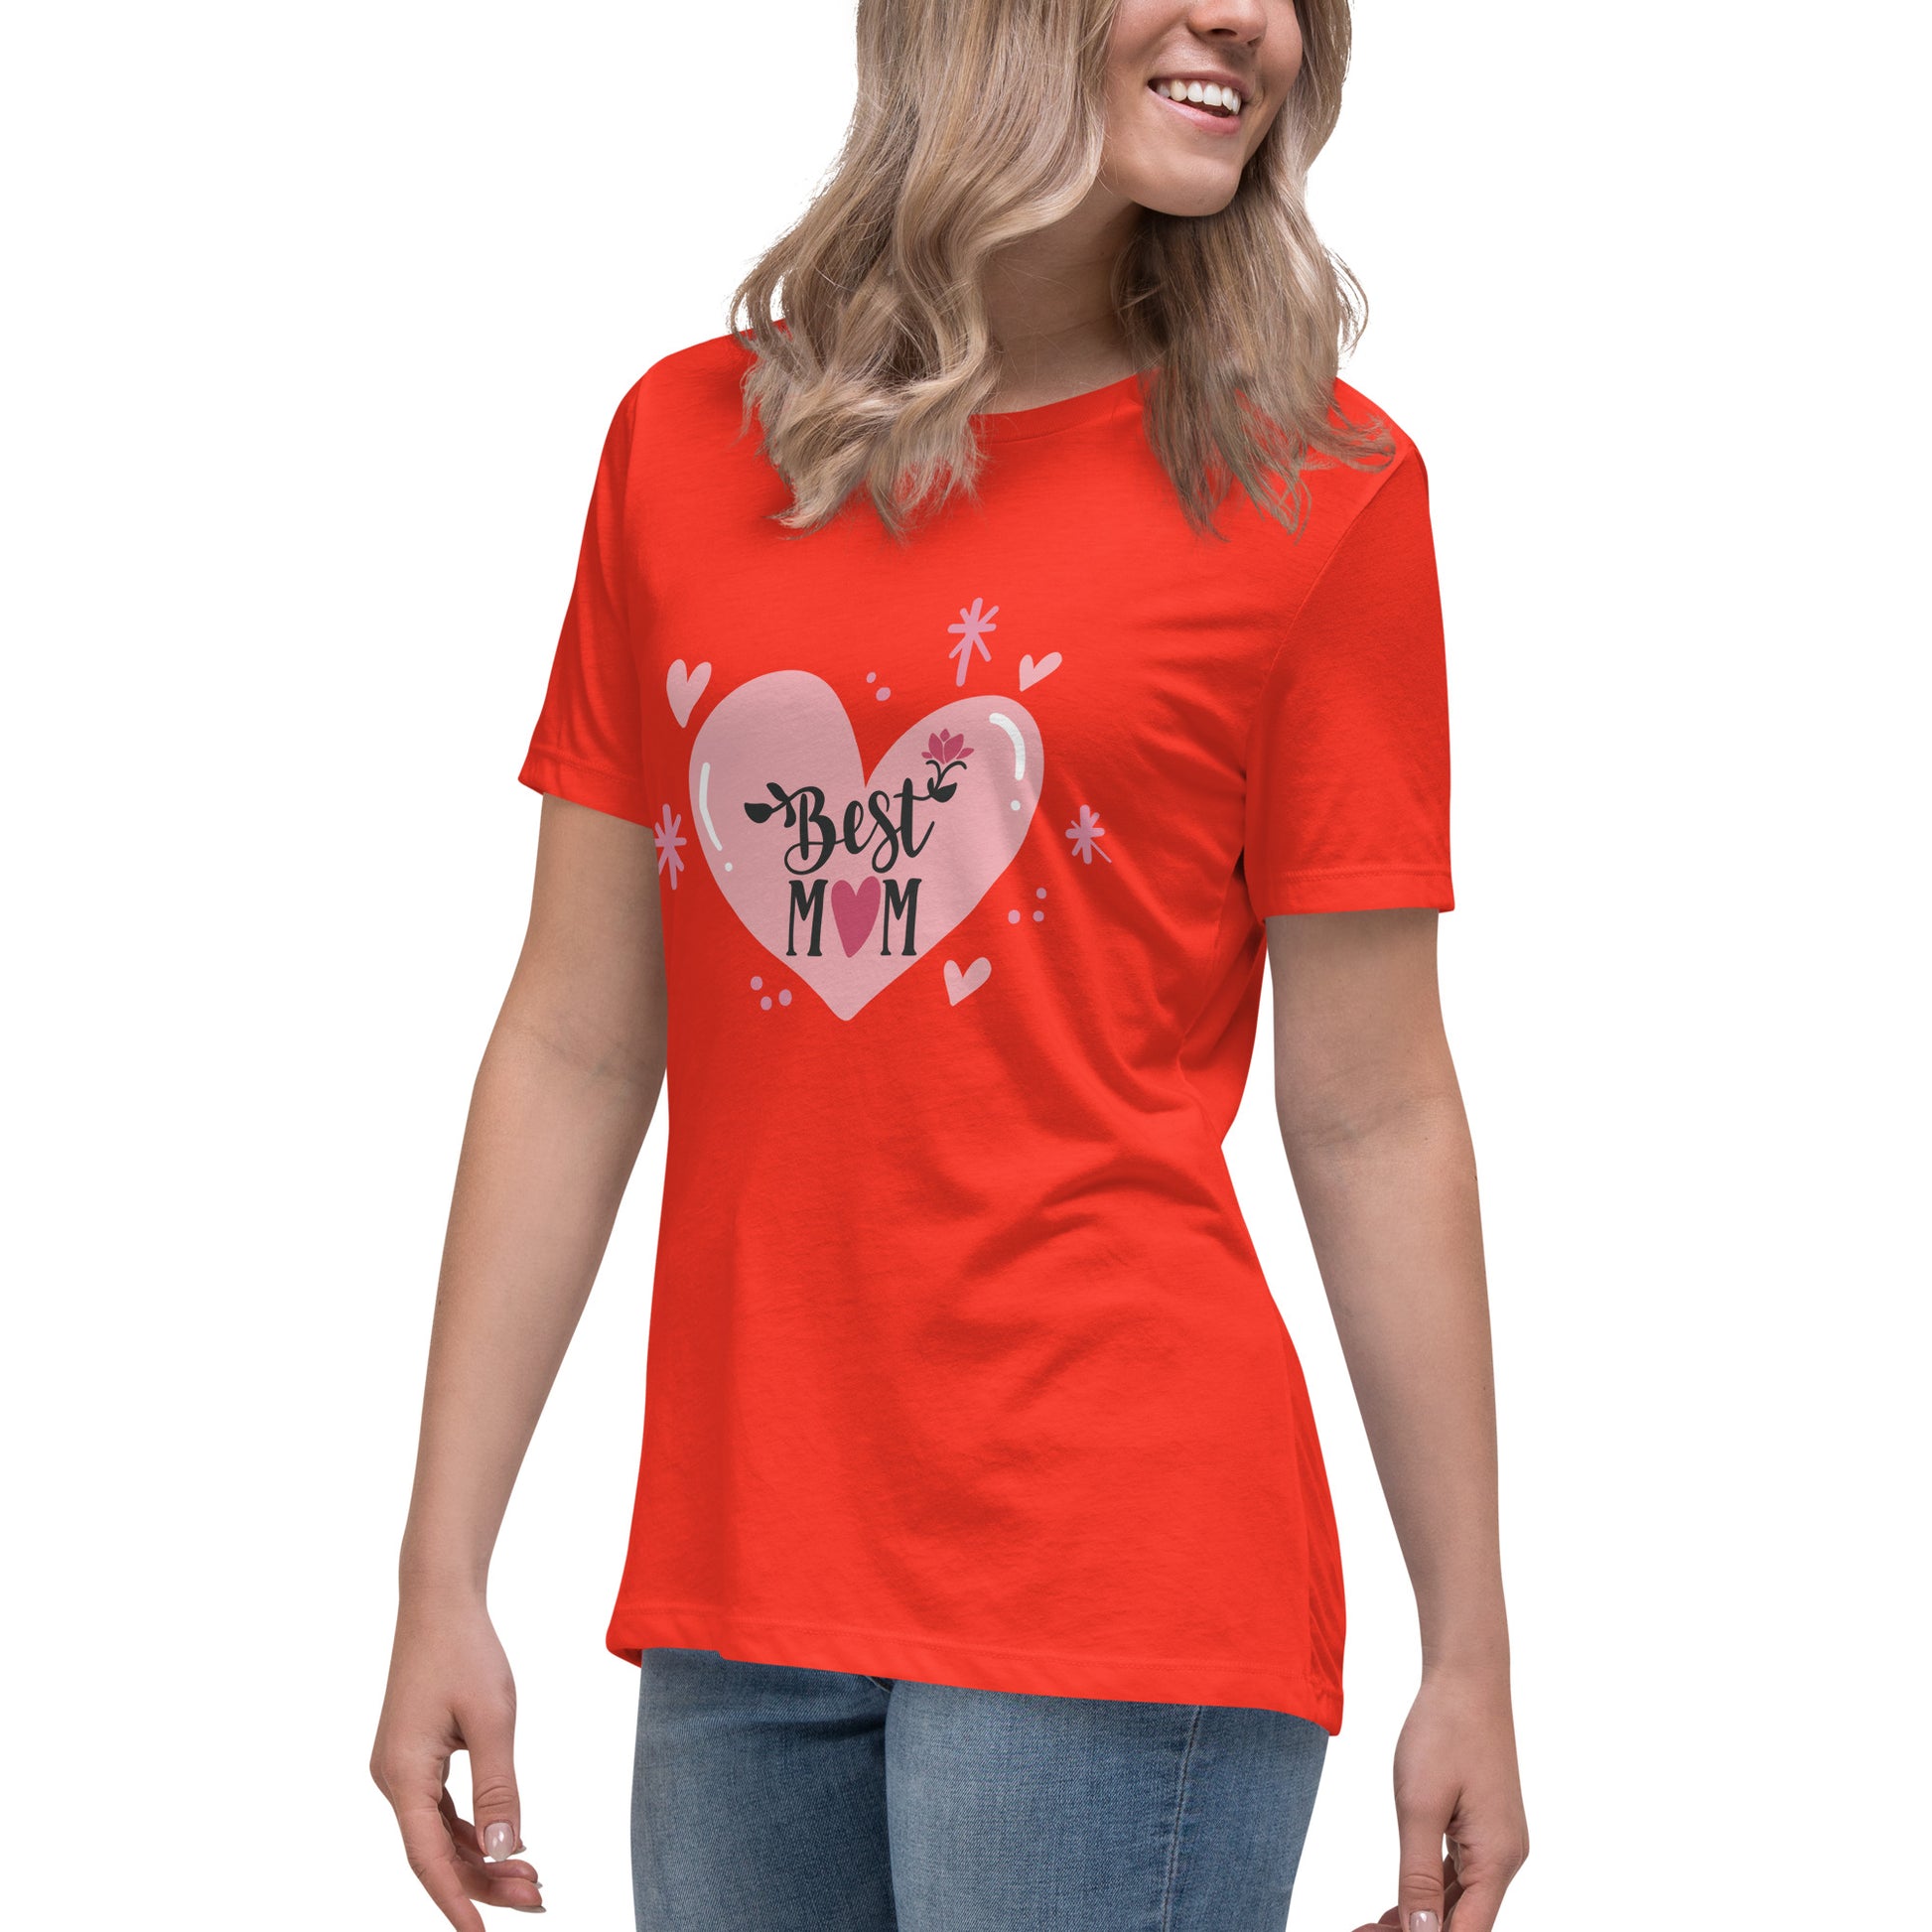 Women with poppy t shirt with hart and text best MOM